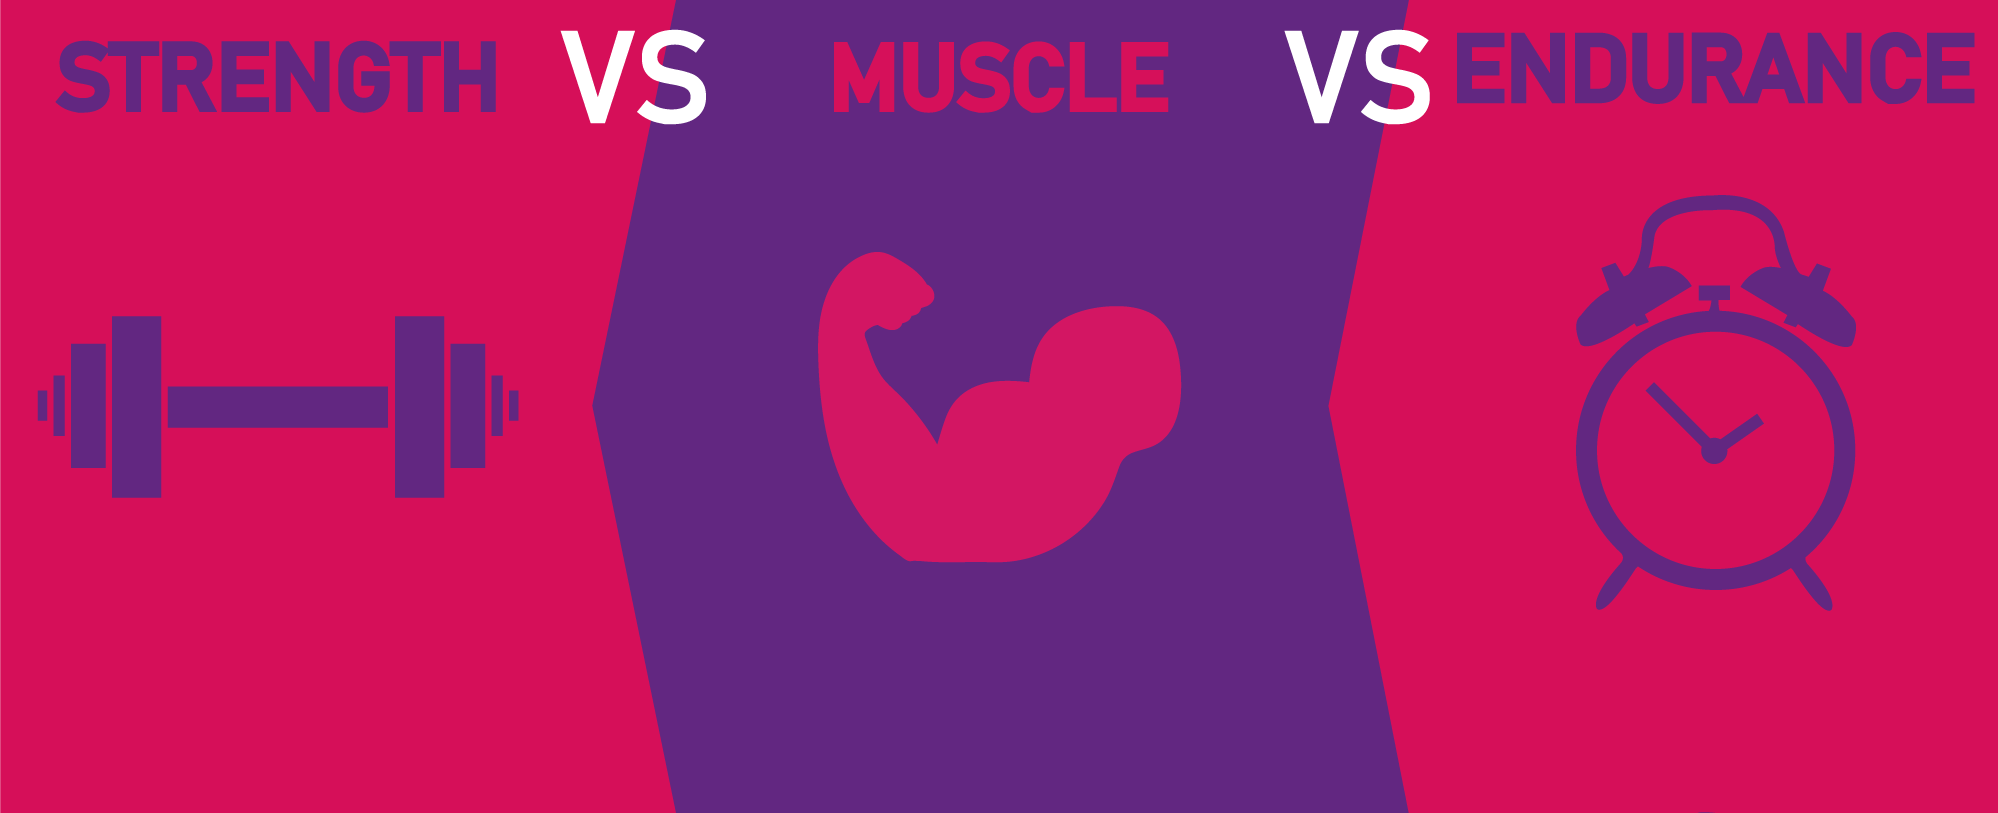 Building Strength vs Muscle vs Endurance | by Dhimant Indrayan House of Hypertrophy | Medium